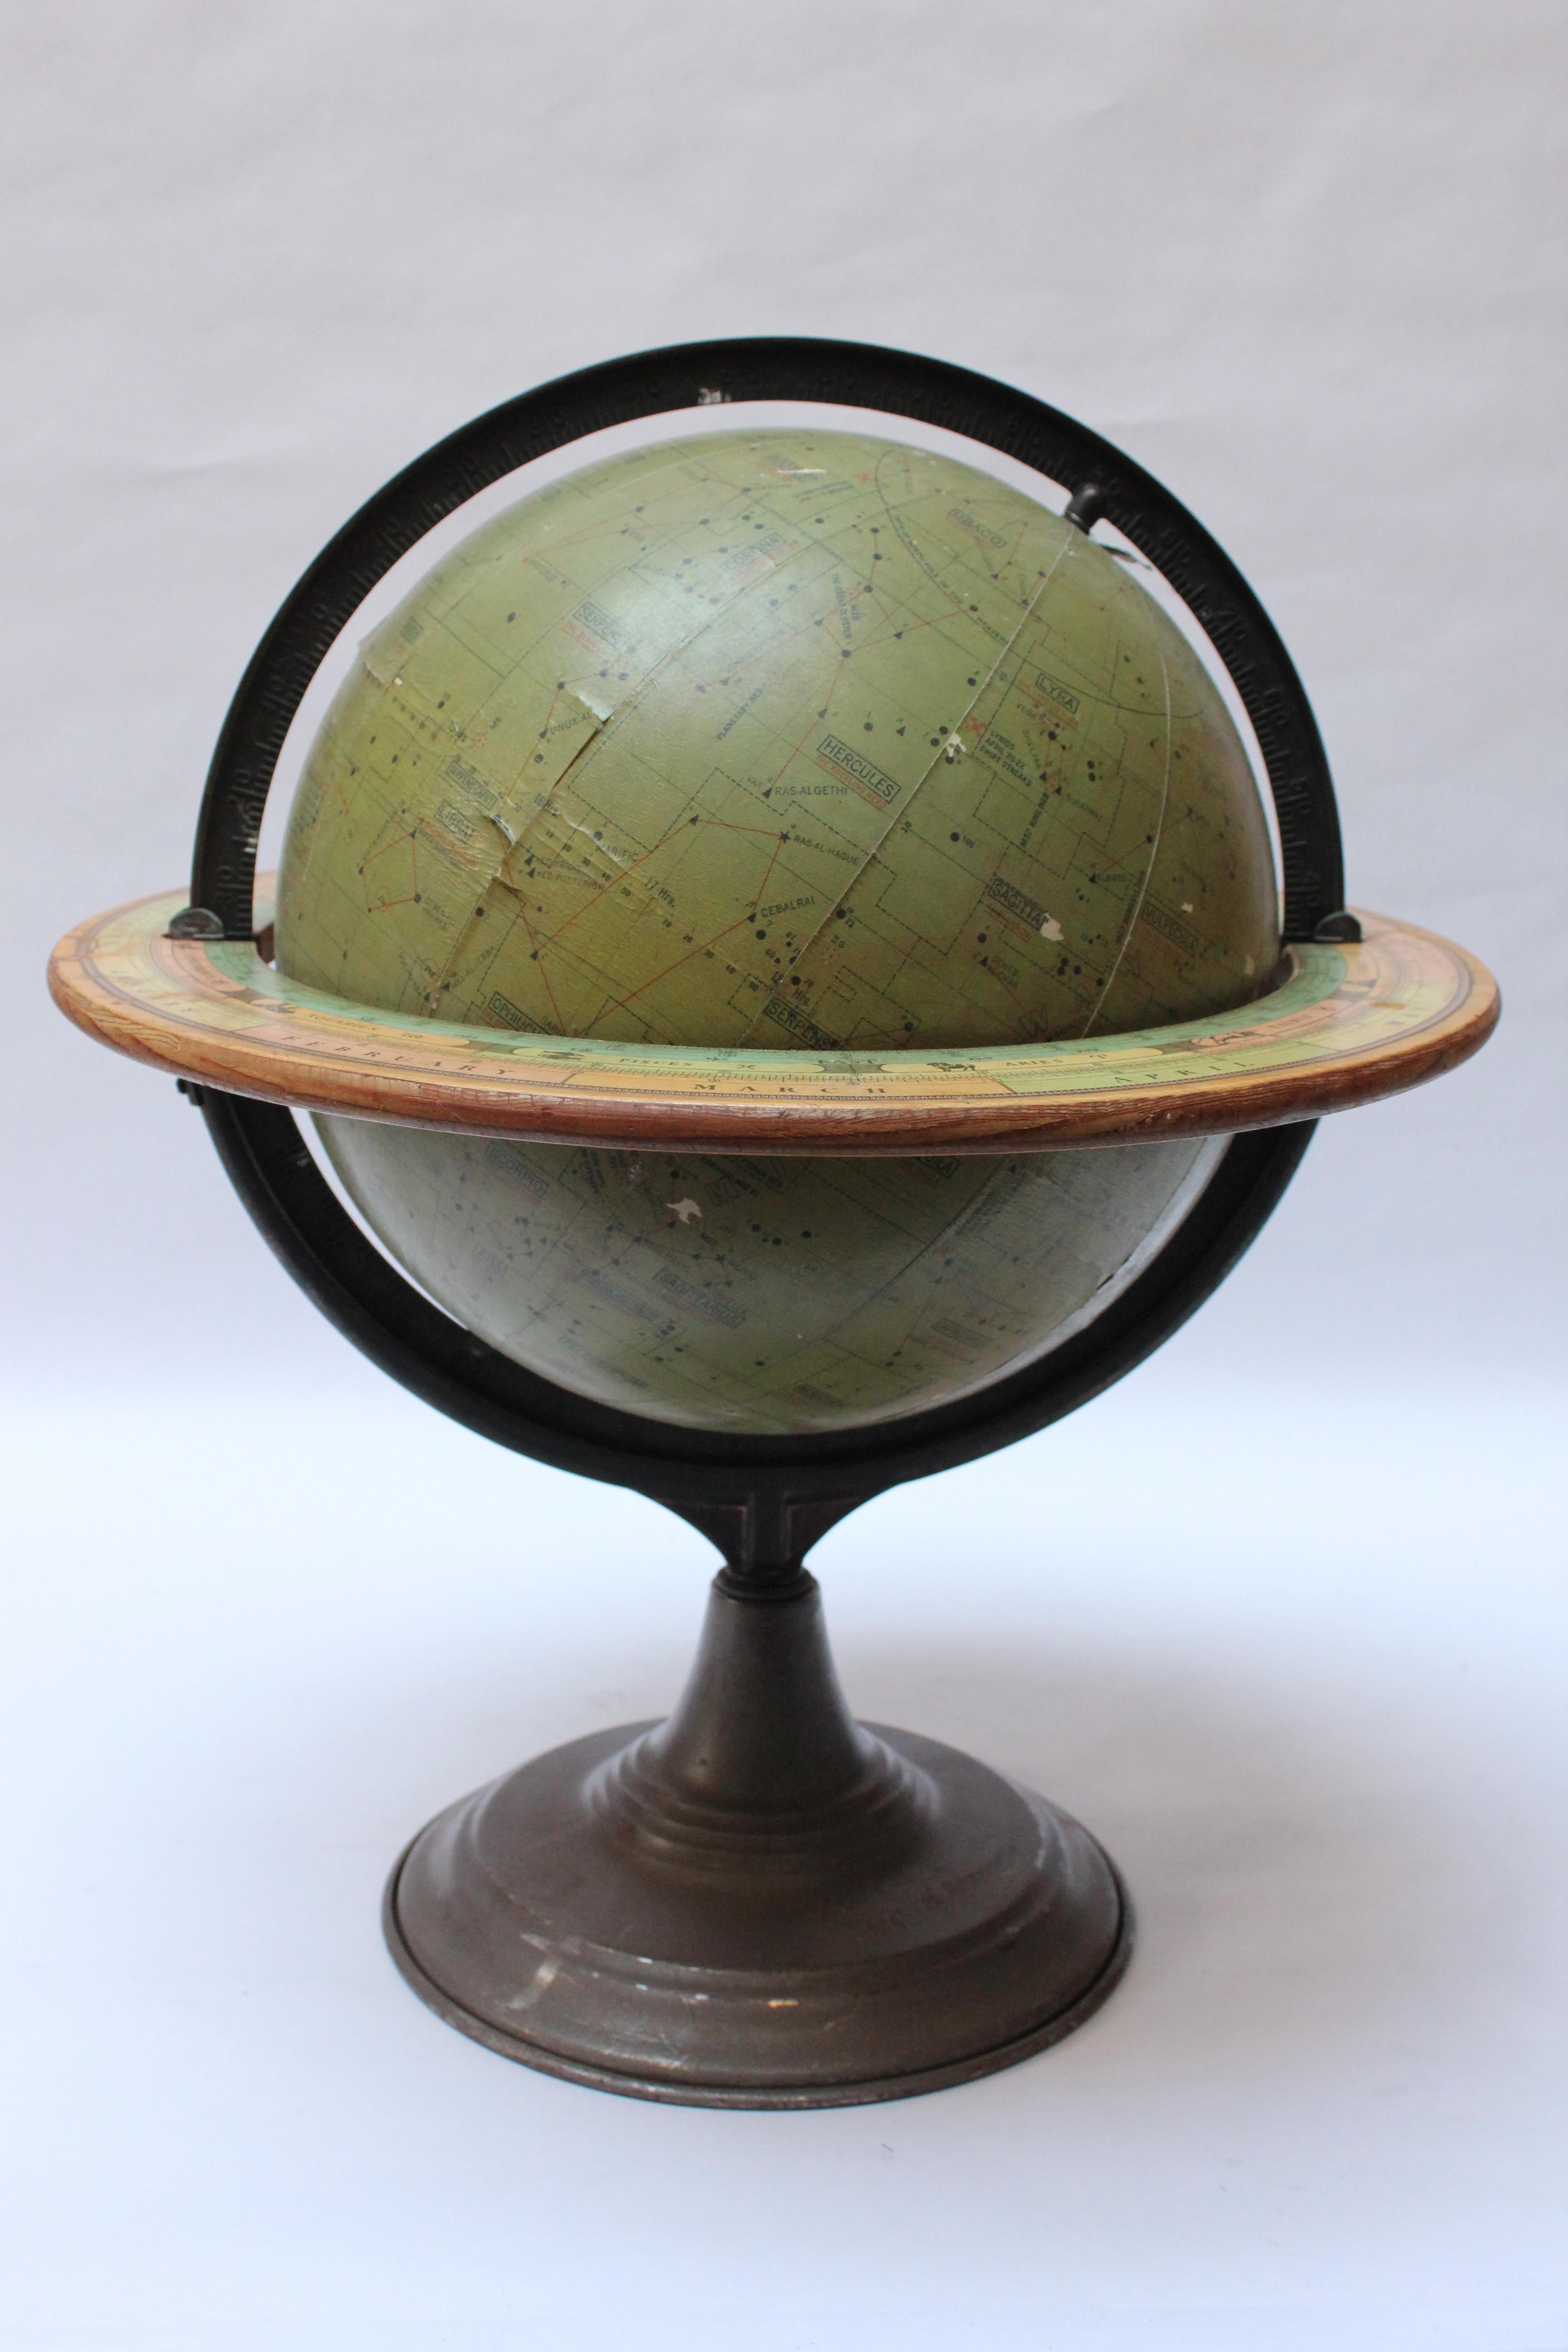 Dennoyer-Geppert Celestial Globe designed by Commander Stubbs RNR (Royal Navy) for classroom astronomy demonstration purposes (ca. 1930, Chicago, IL.). Composed of paper gores in olive green over a hollow metal core, featuring an adjustable